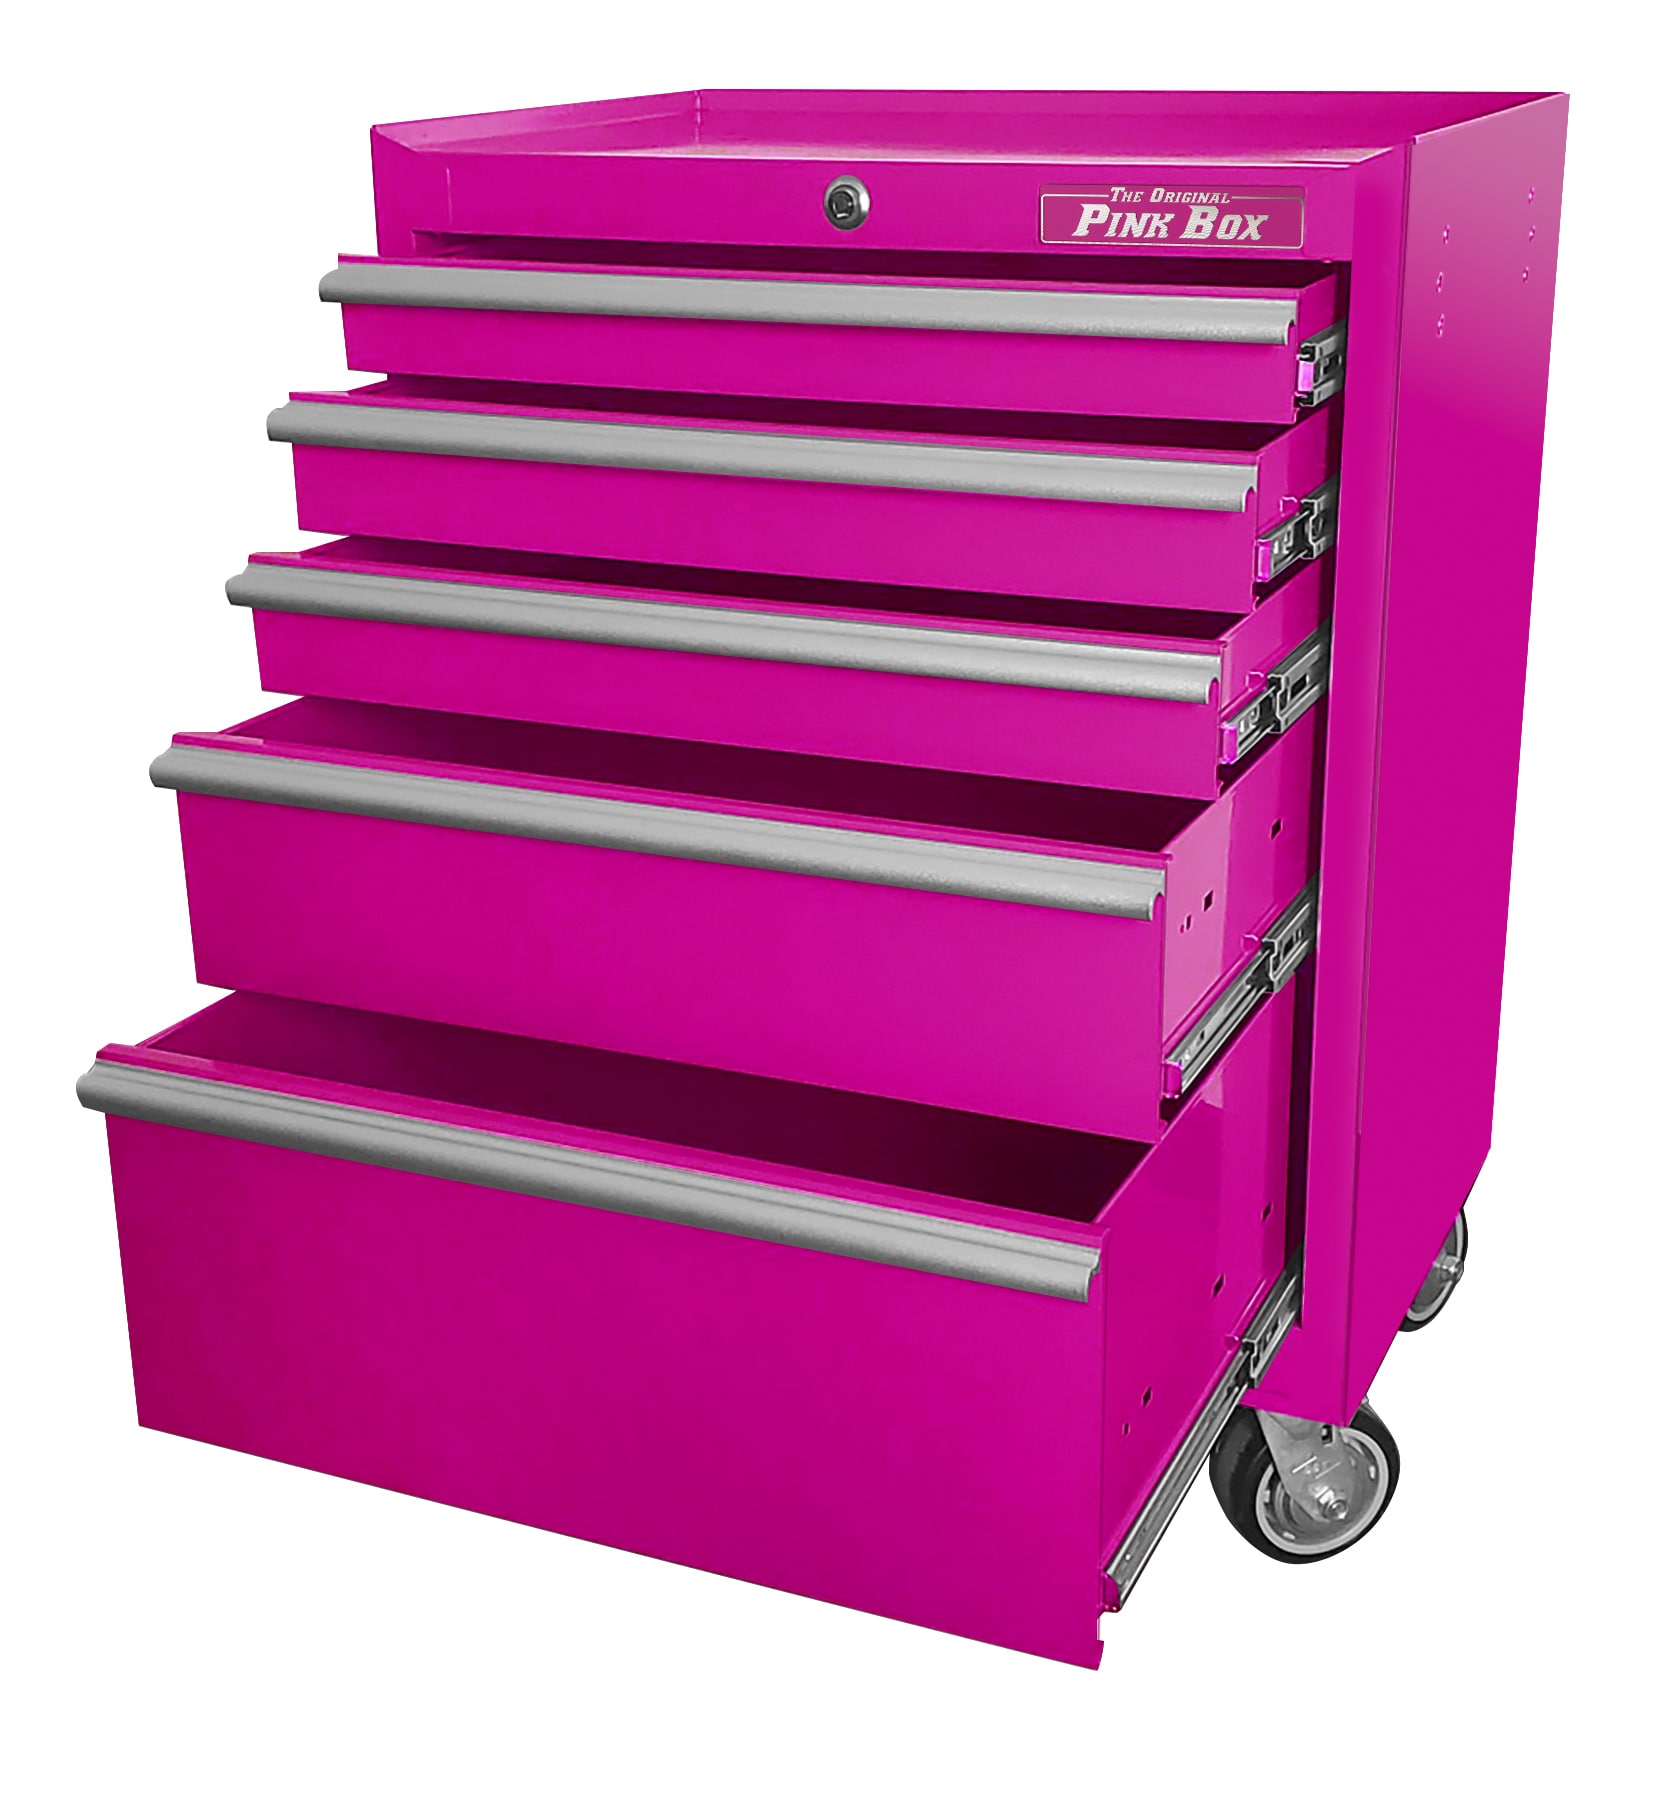 The Original Pink Box 26-in W x 65.25-in H 10 Ball-bearing Steel